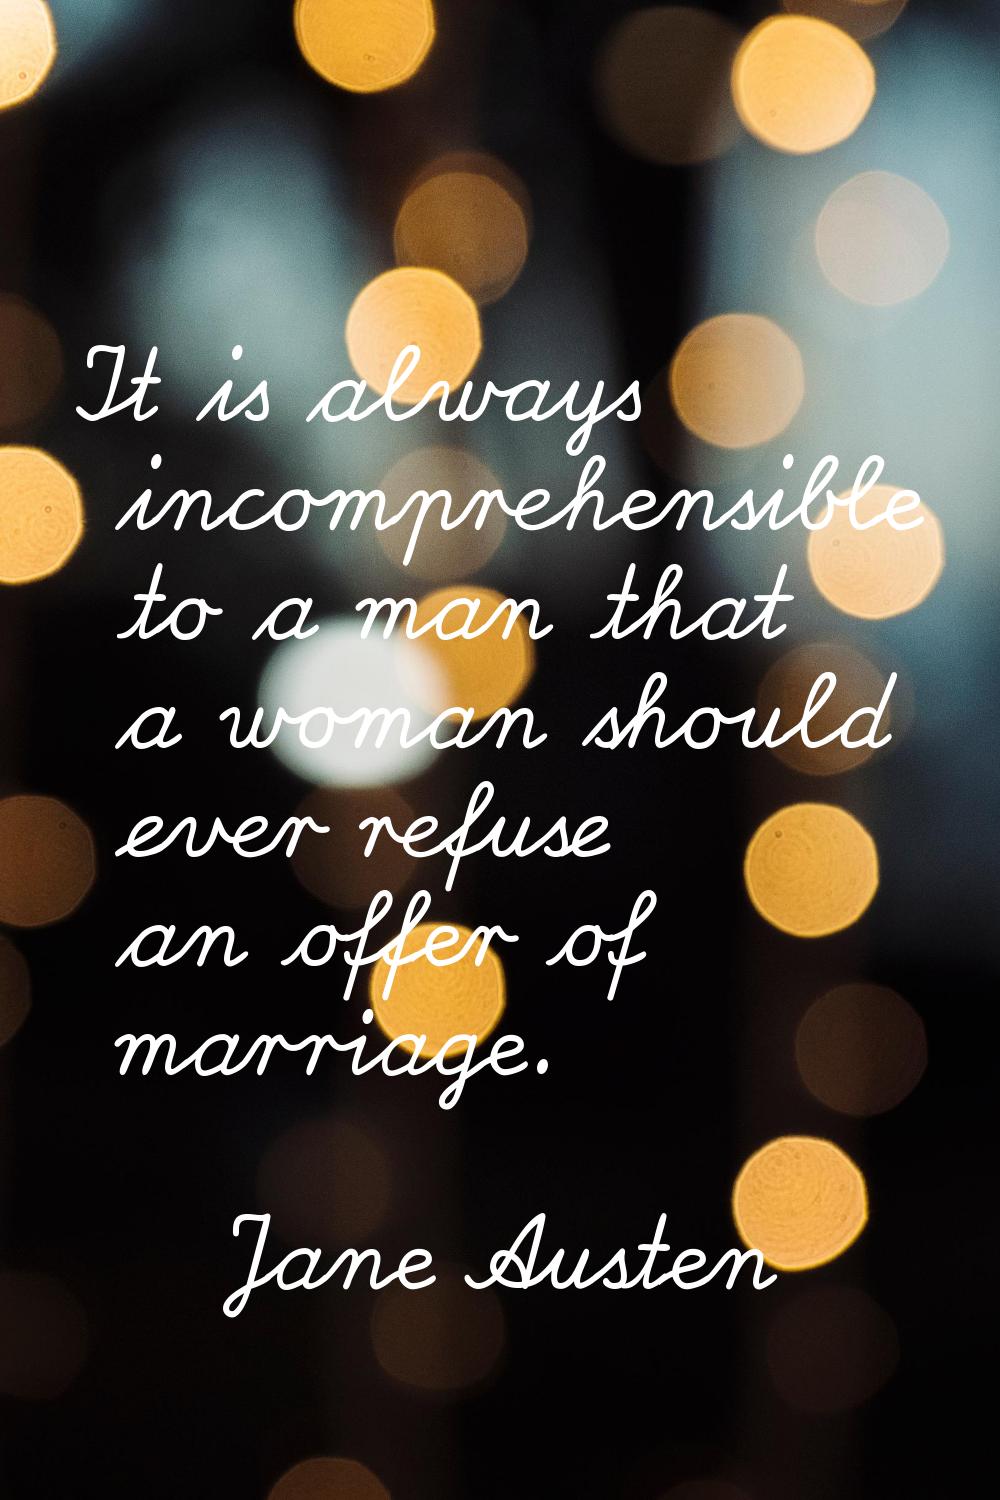 It is always incomprehensible to a man that a woman should ever refuse an offer of marriage.